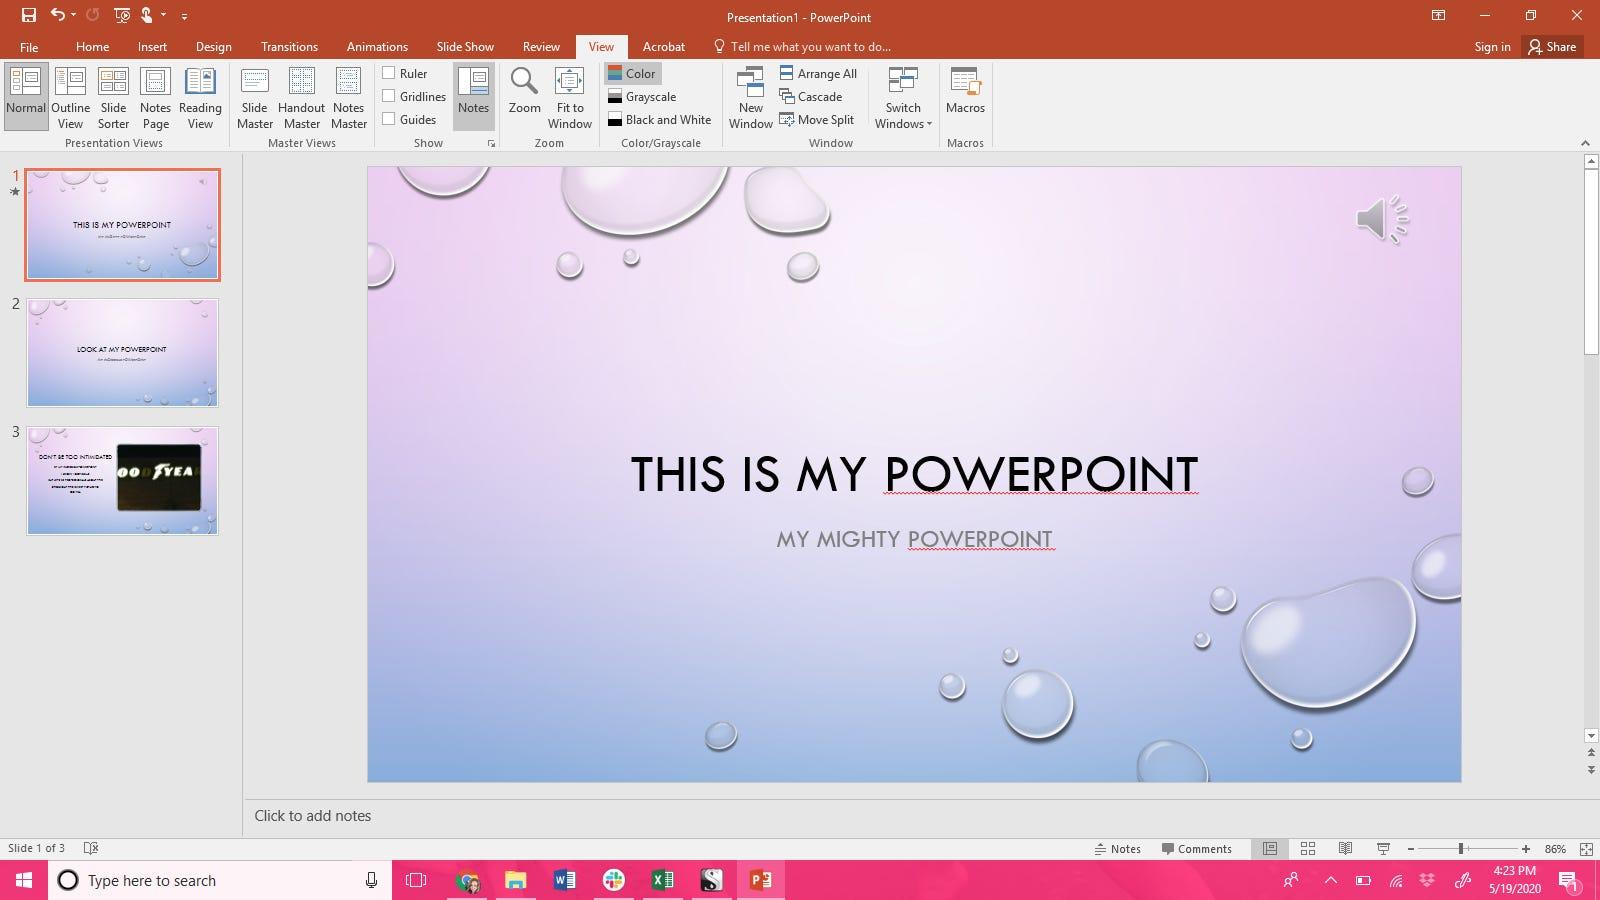 share powerpoint presentation and see notes